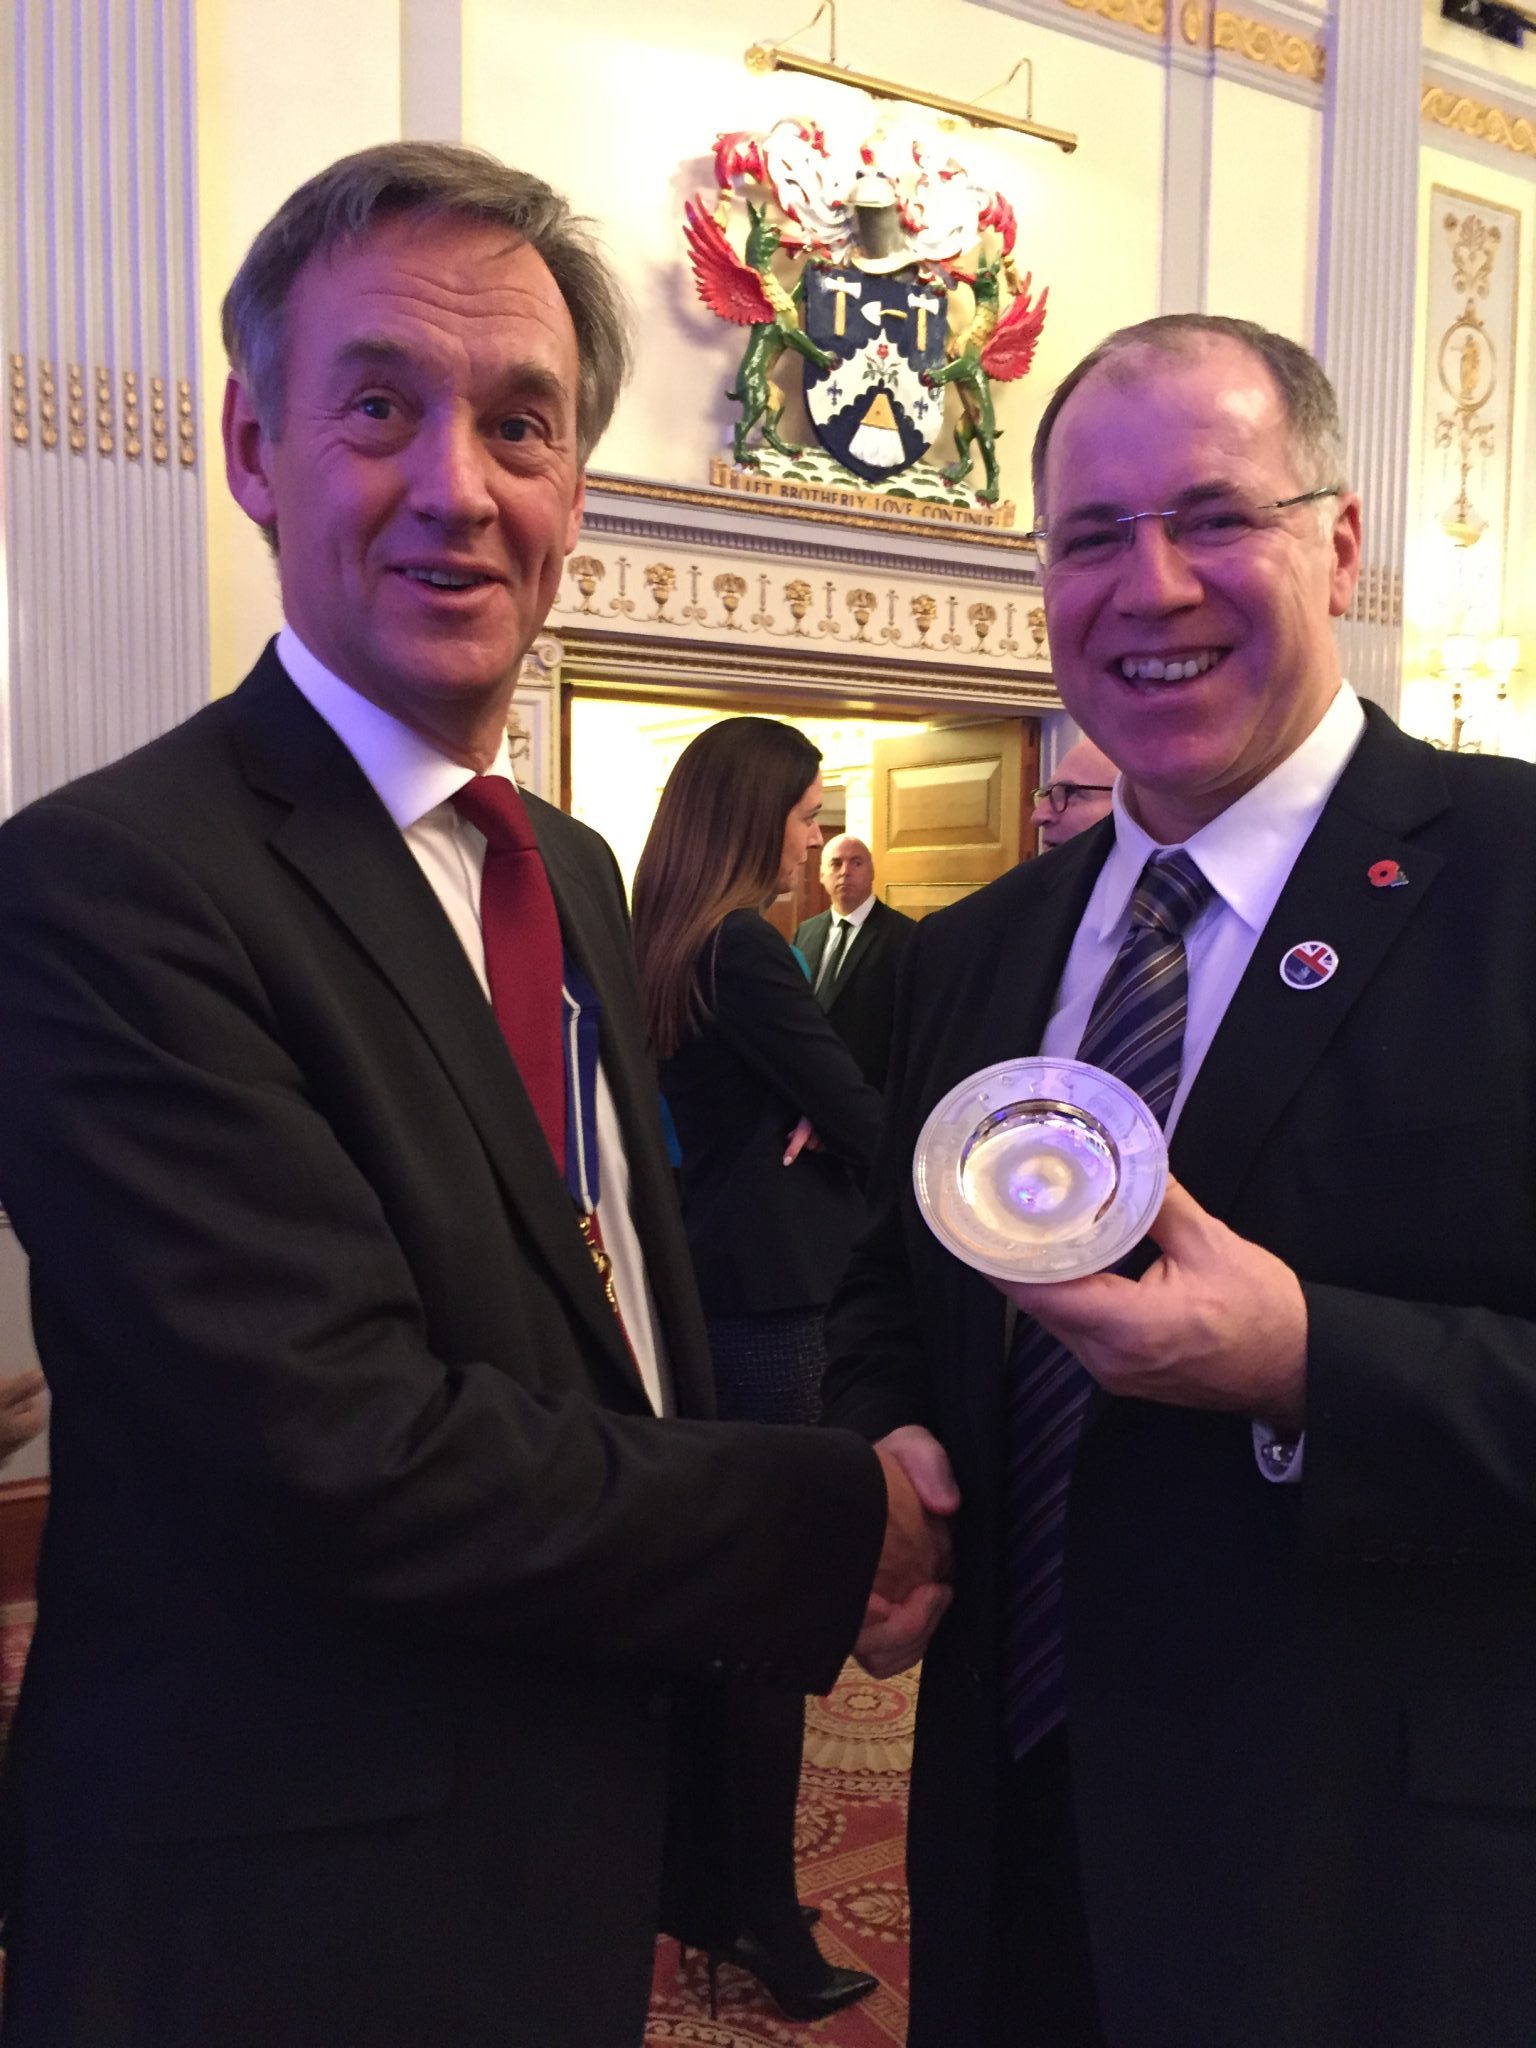 Timothy Cooke OBE, The Worshipful Company of Plaisterers congratulates David Hall